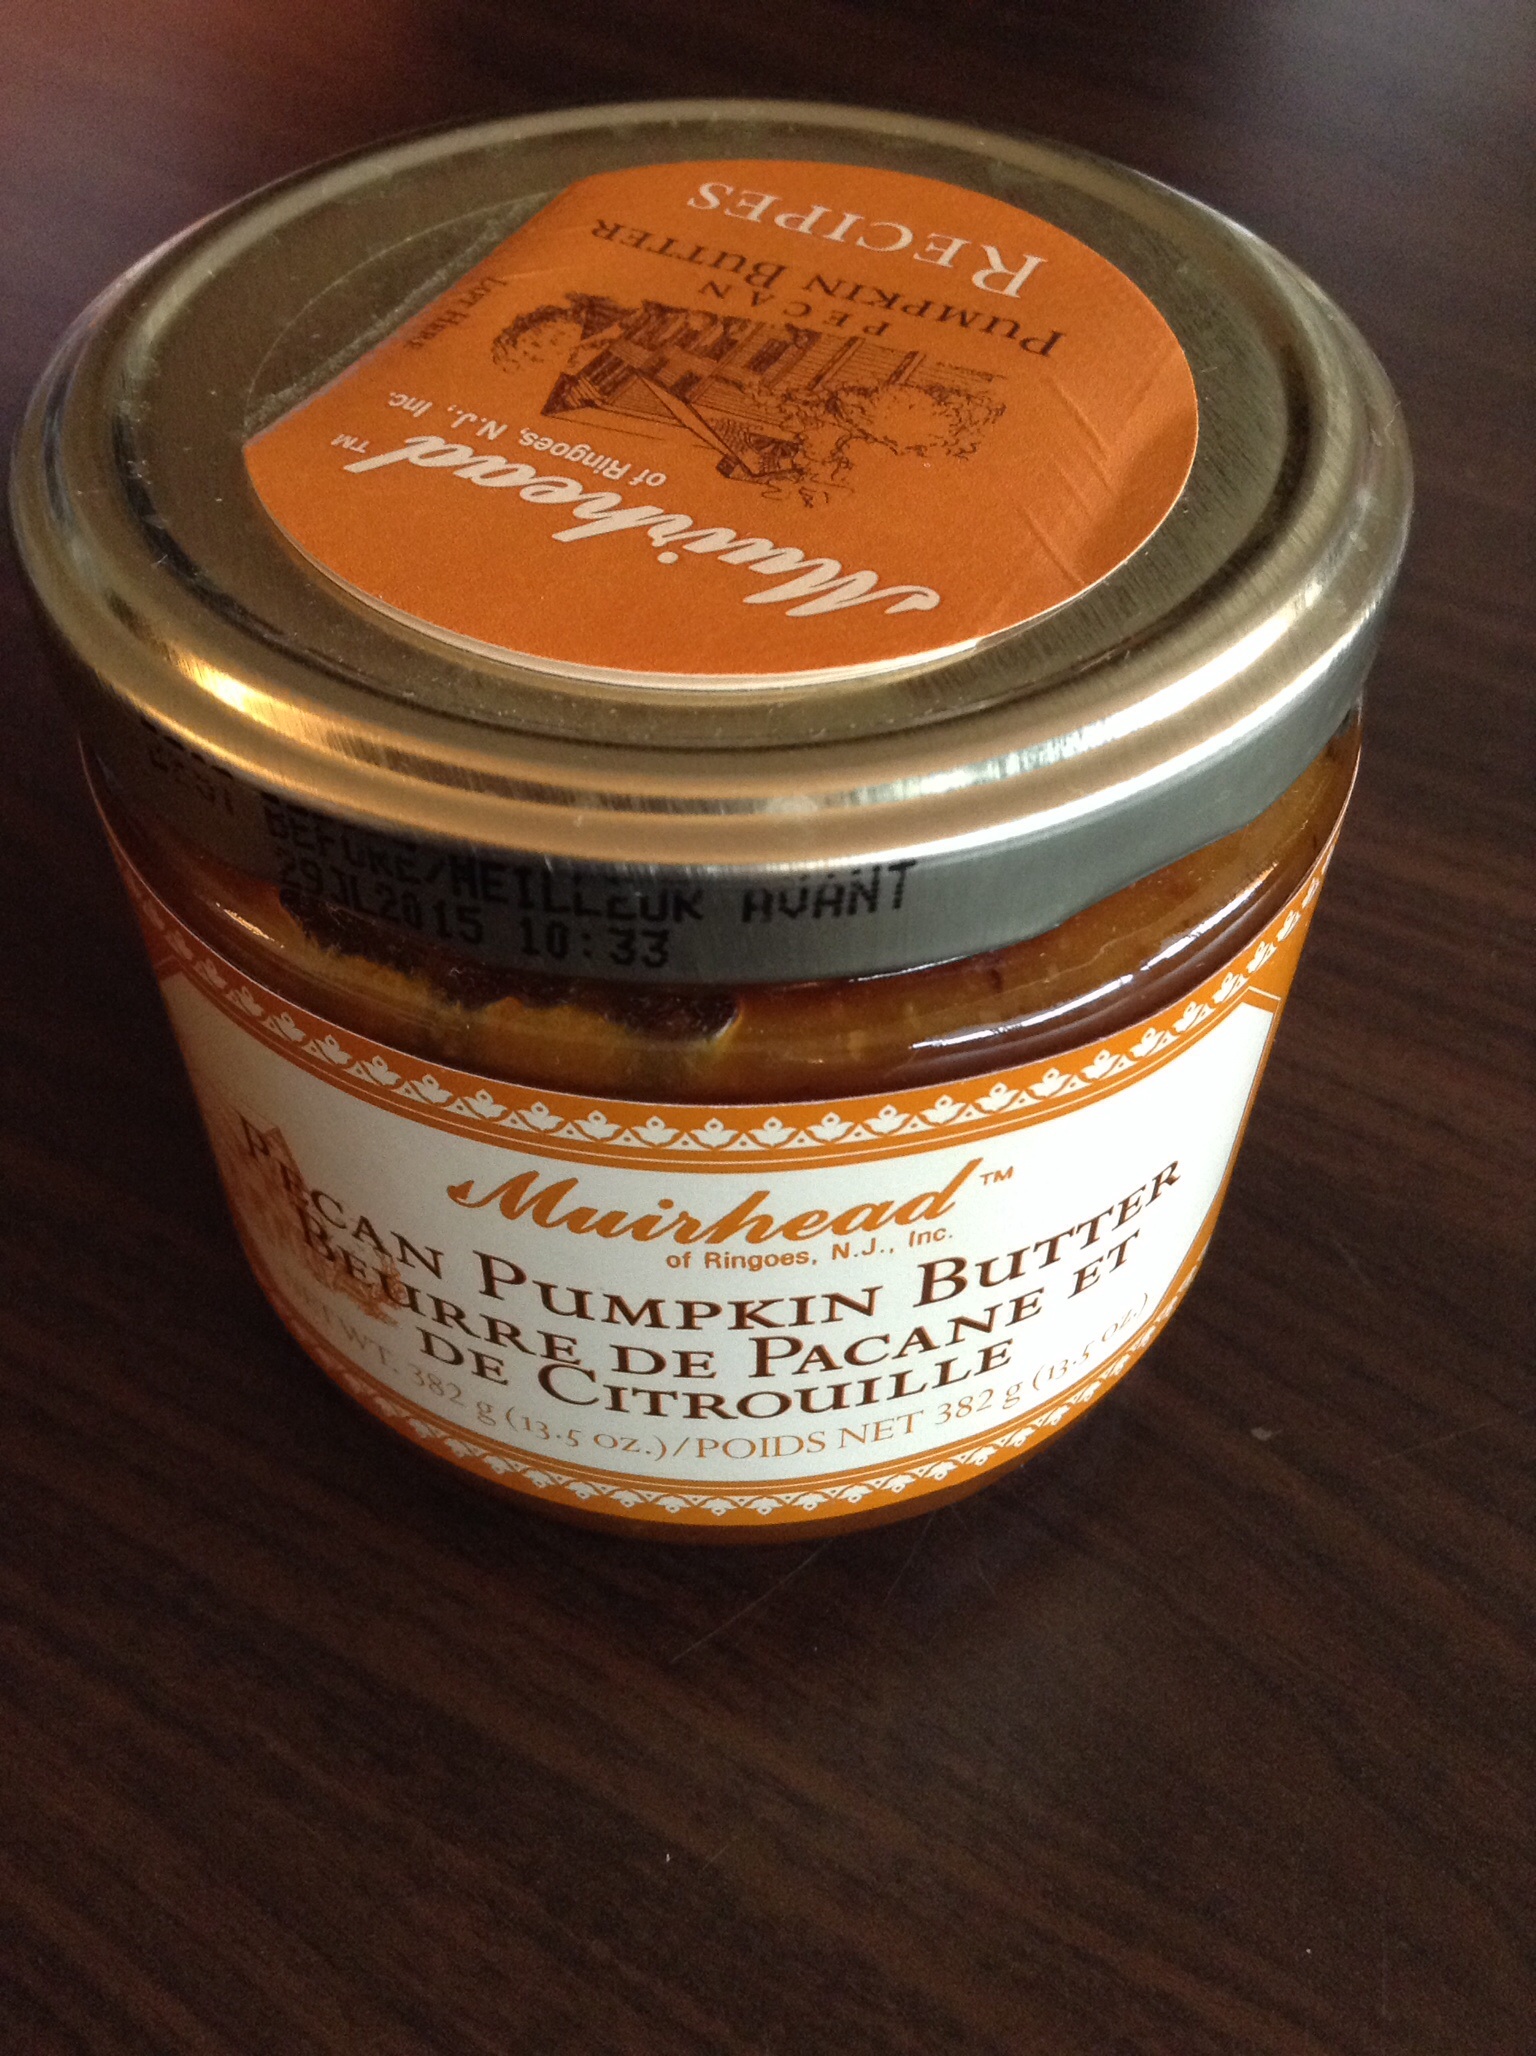 Pumpkin Butter…Need I say more?